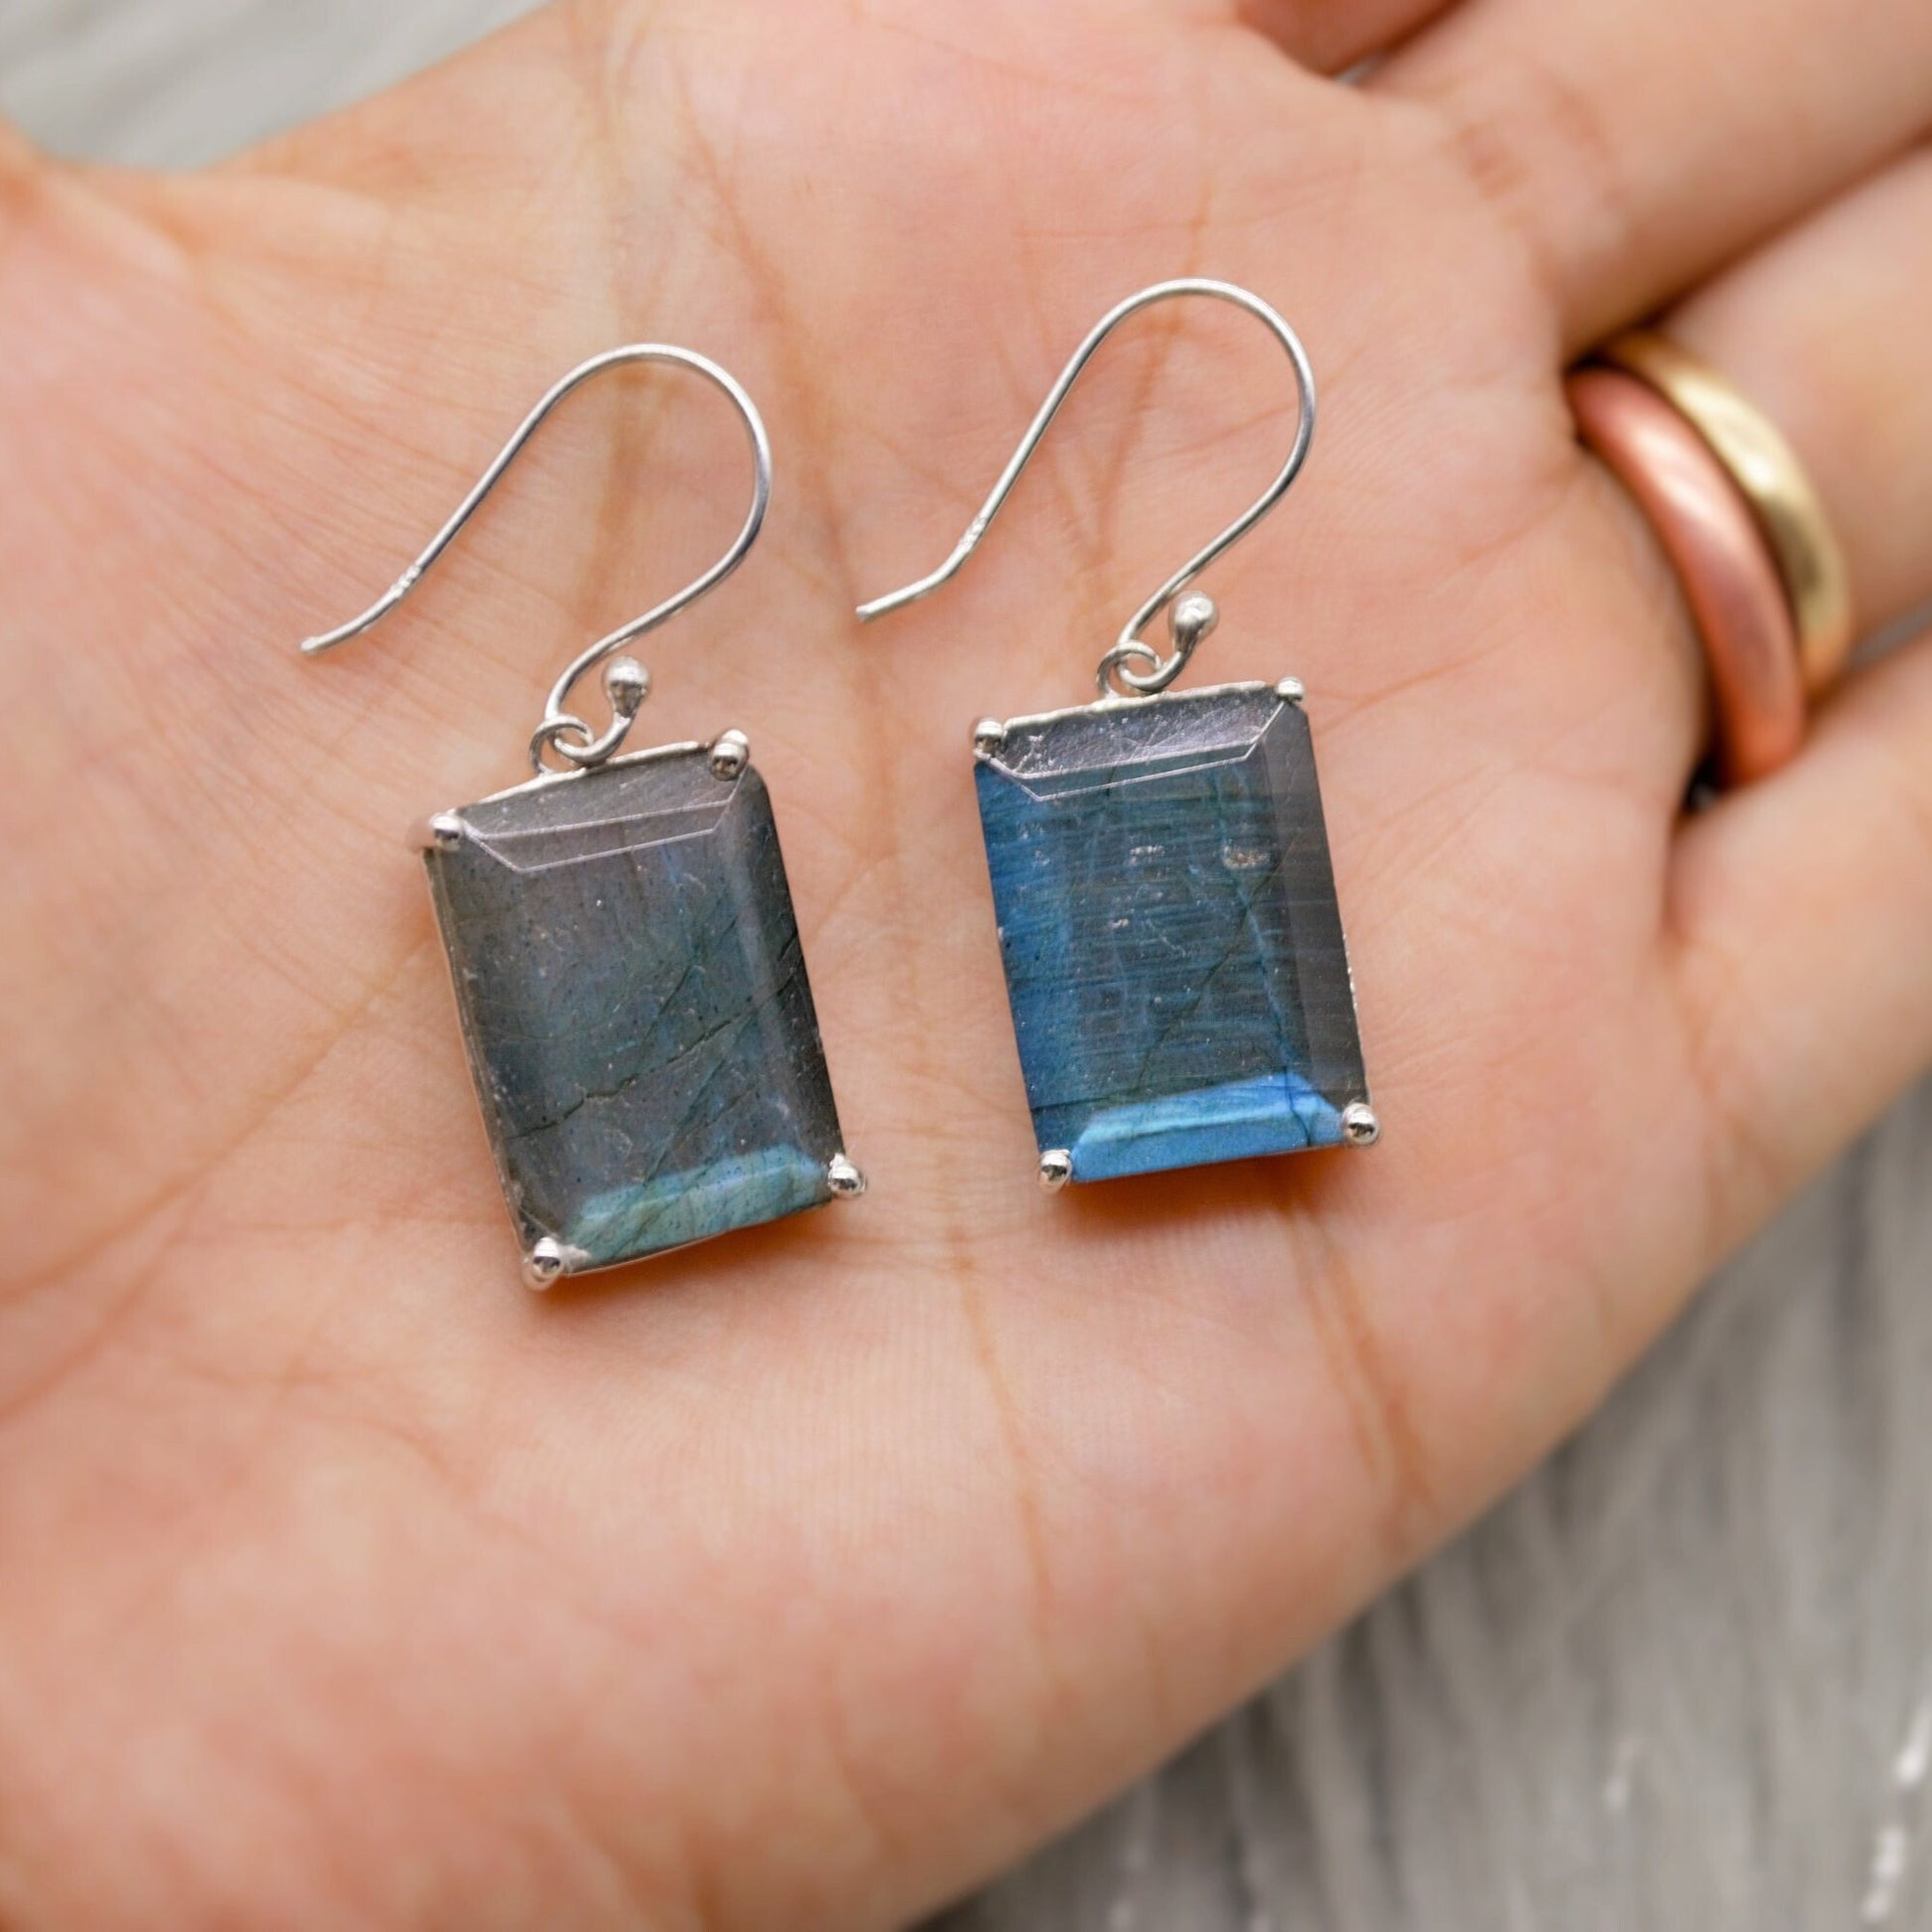 Labradorite Dangle Silver Earrings, Sterling Silver, Handmade Gemstone Earrings, Labradorite Stone Jewelry, Gift For Her